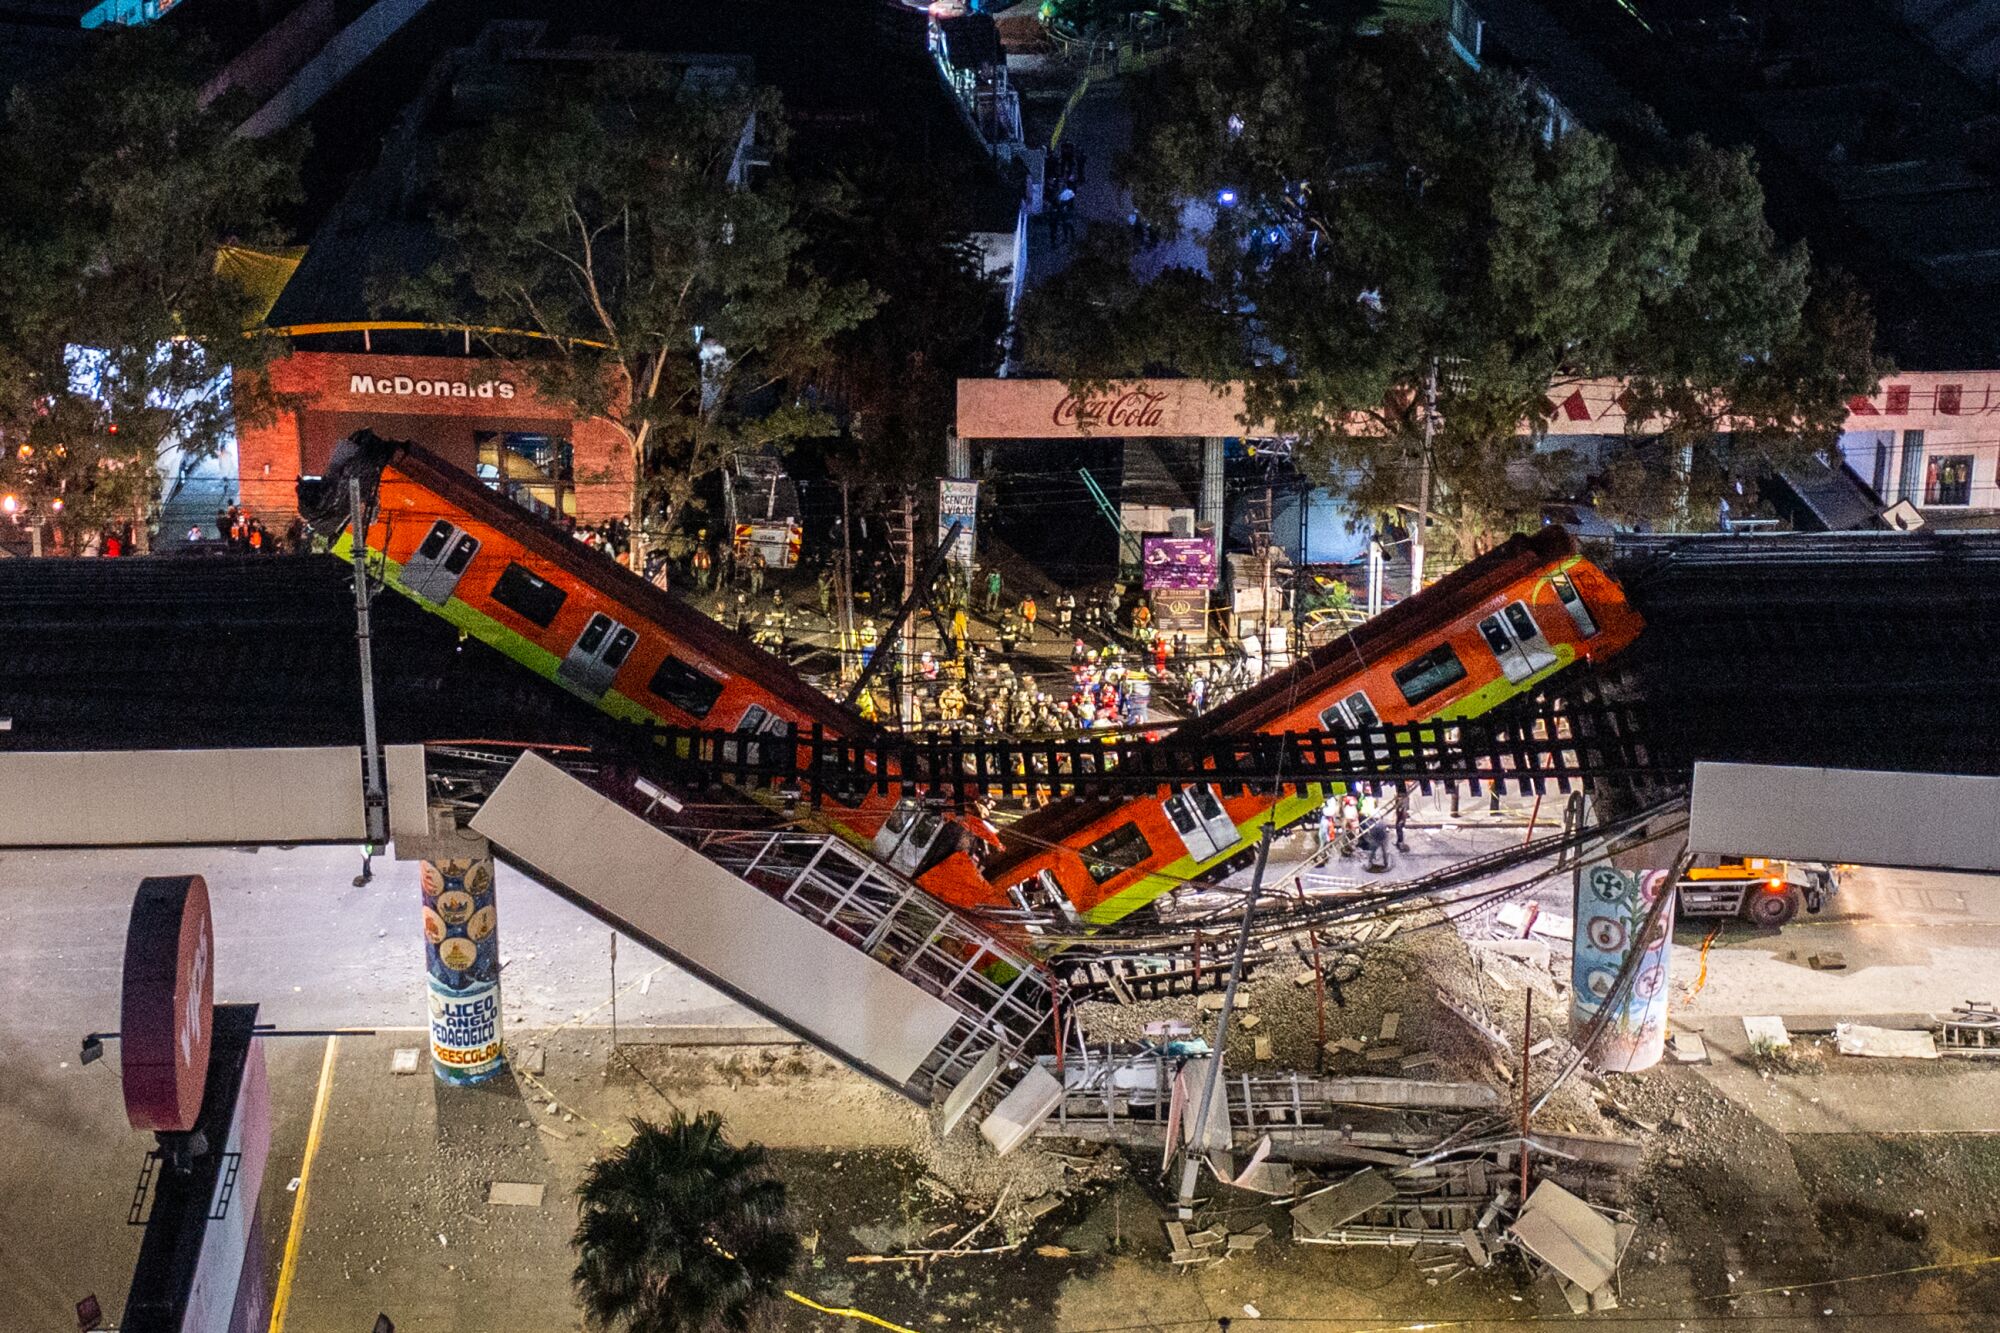 Two train cars hang off a collapsed elevated track.